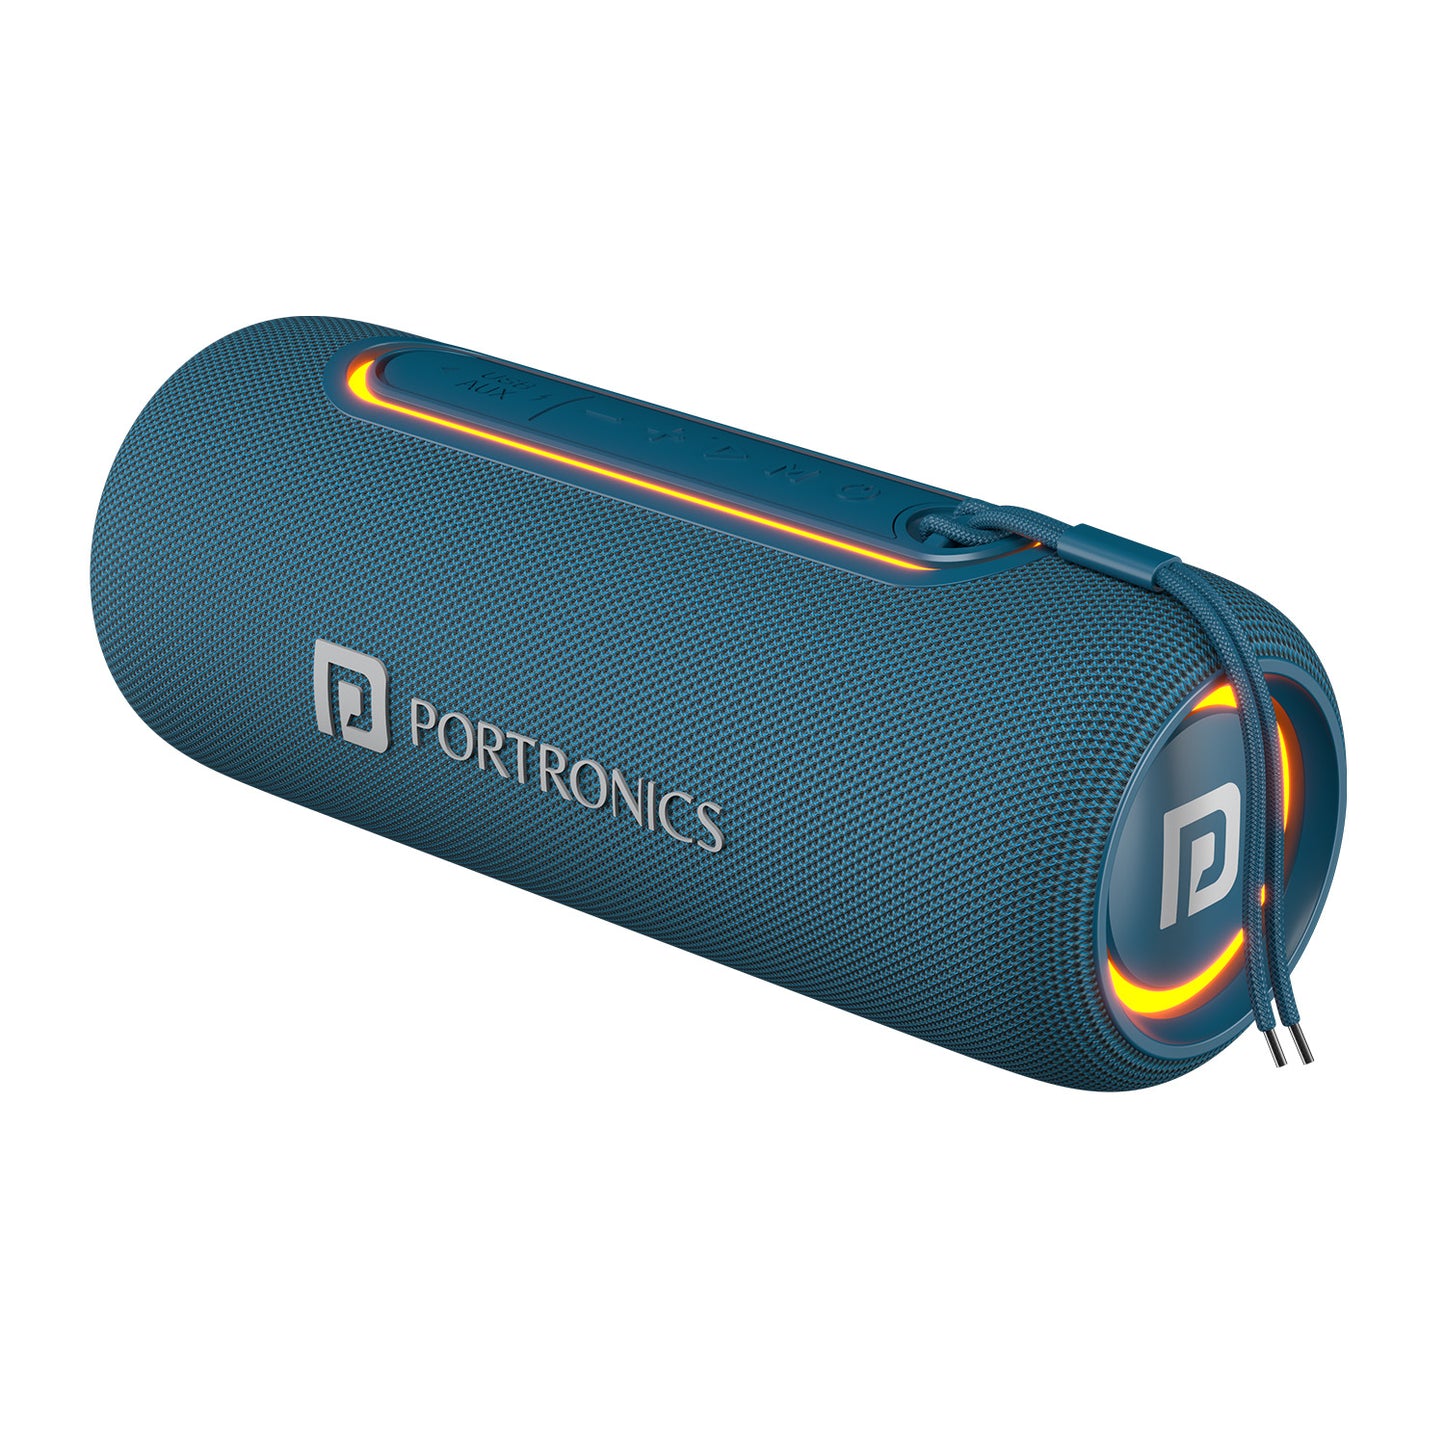 Portronics Resound 2 best portable speakers in india under 3000 for iOS & Android, Fast and easy connectivity. Blue